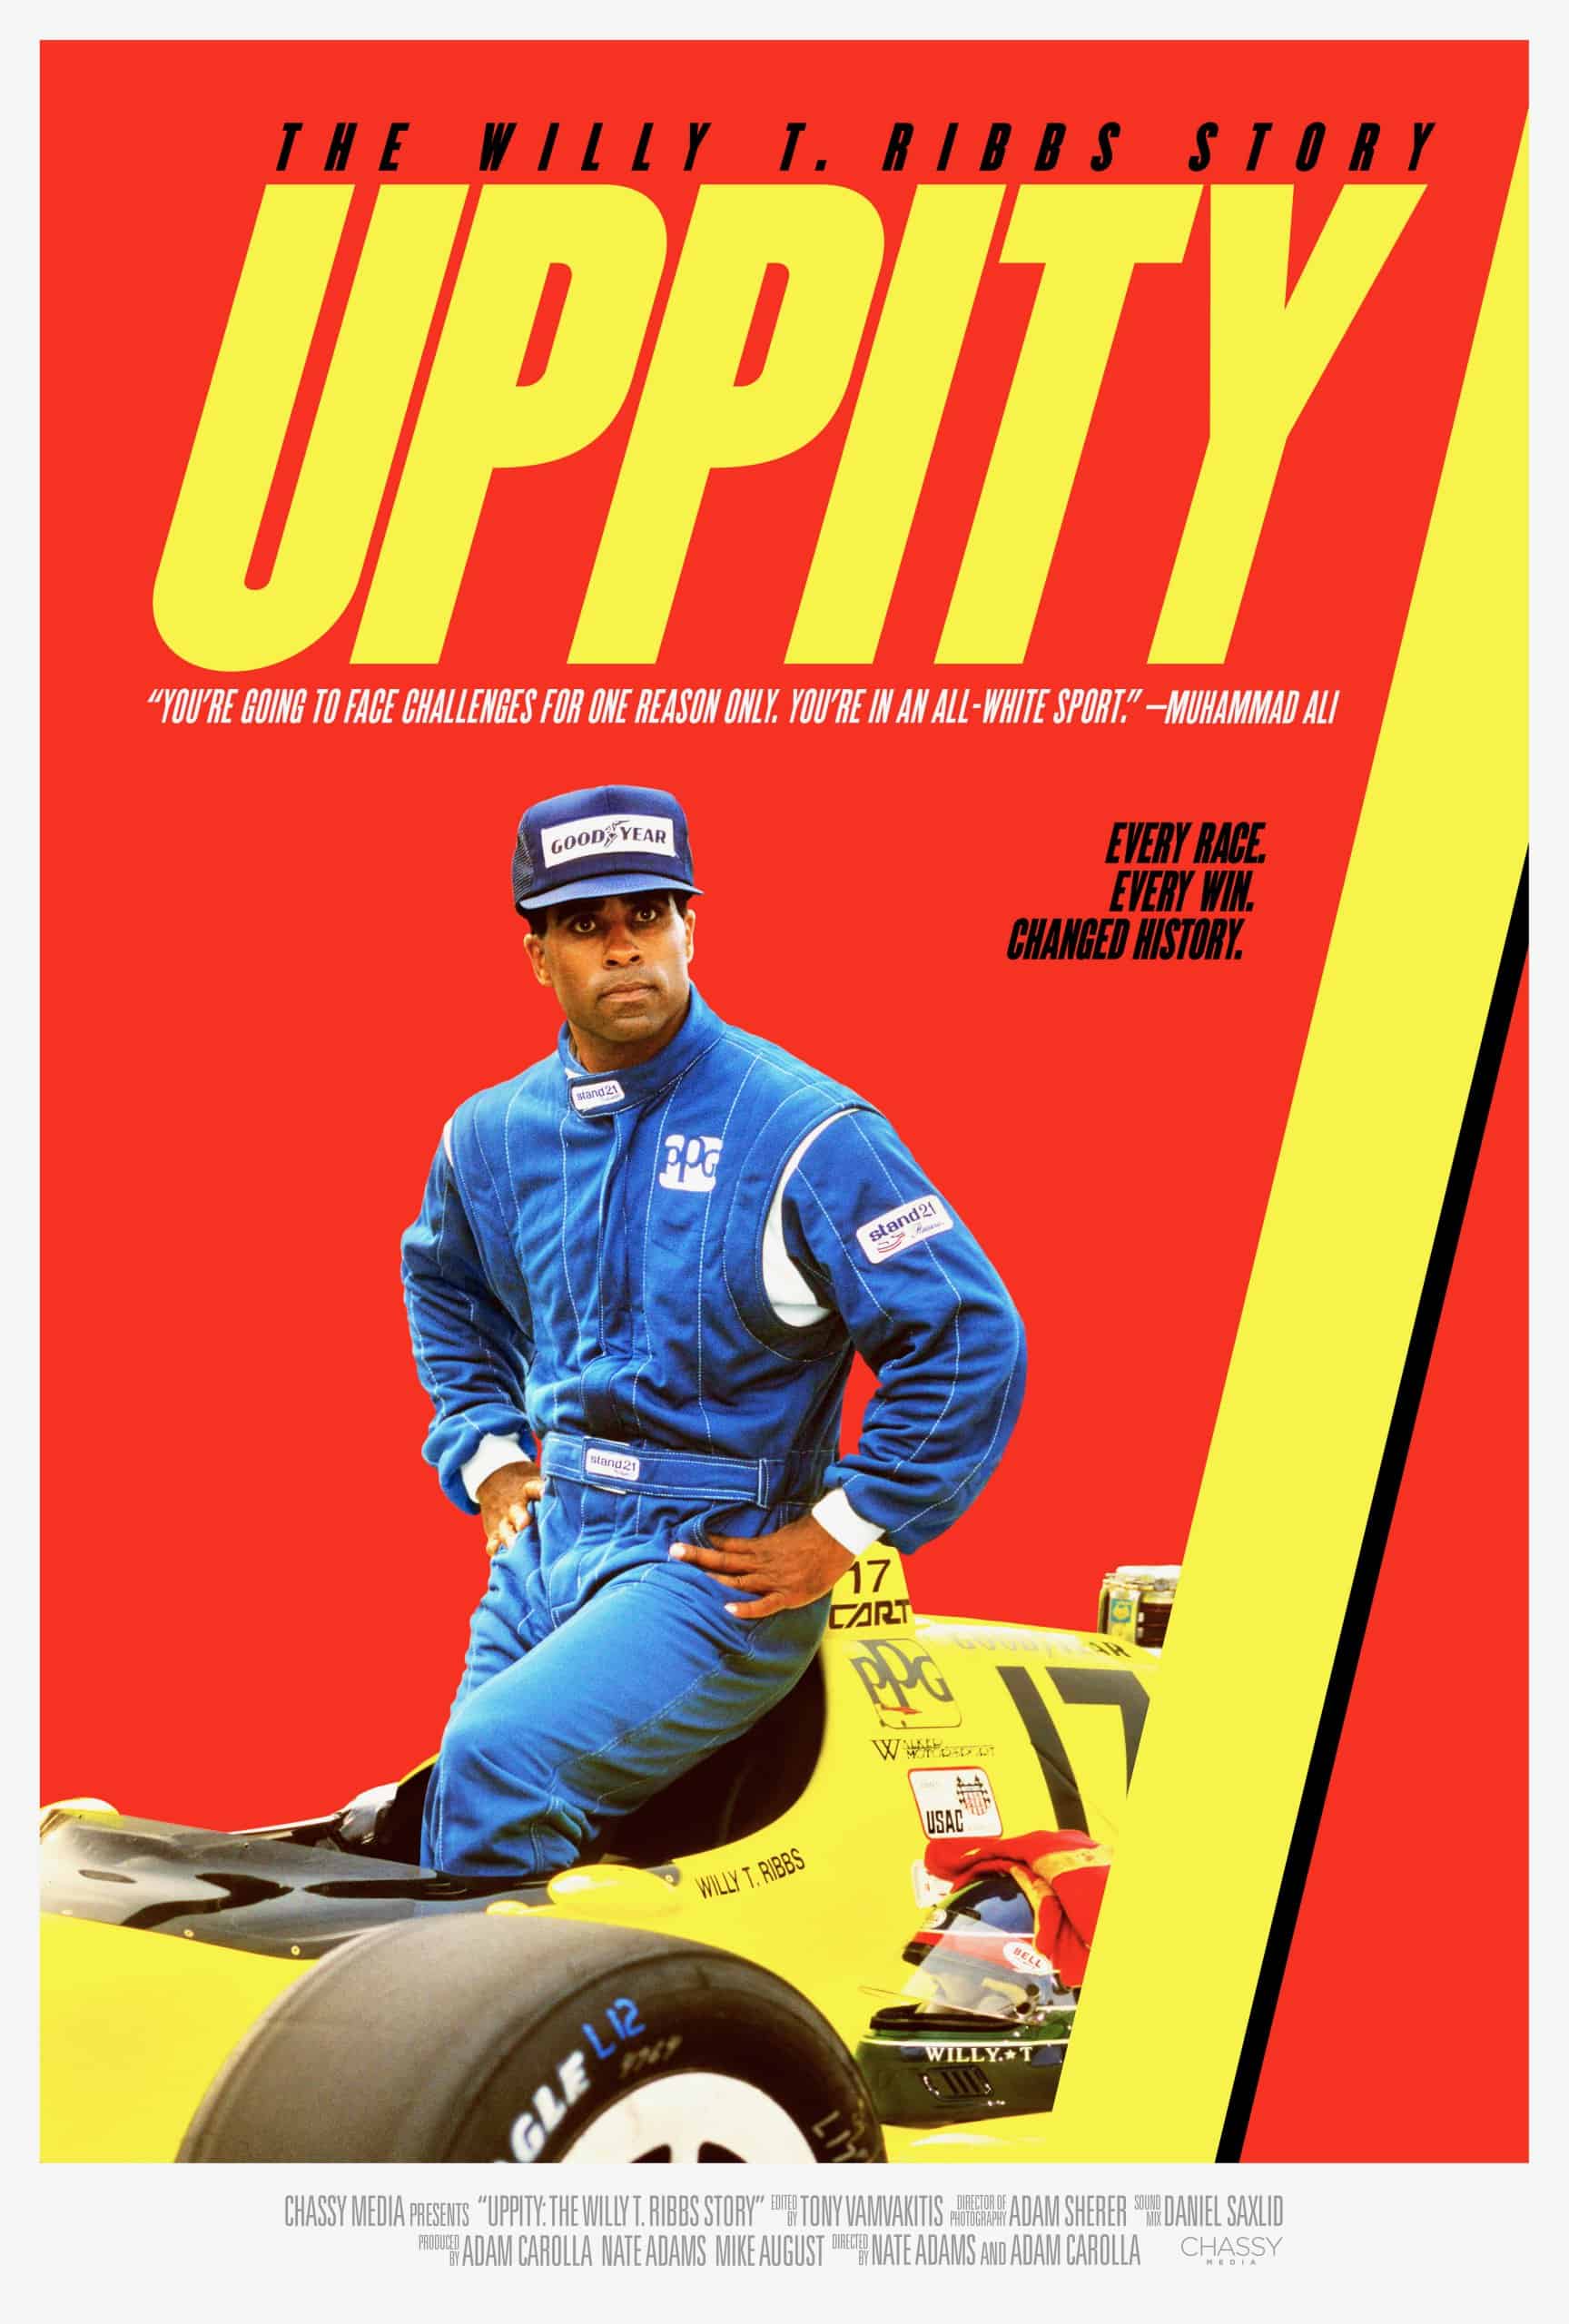 Willy T. Ribbs, ‘Uppity: The Willy T. Ribbs Story’ documentary available from Chassy Media, ClassicCars.com Journal